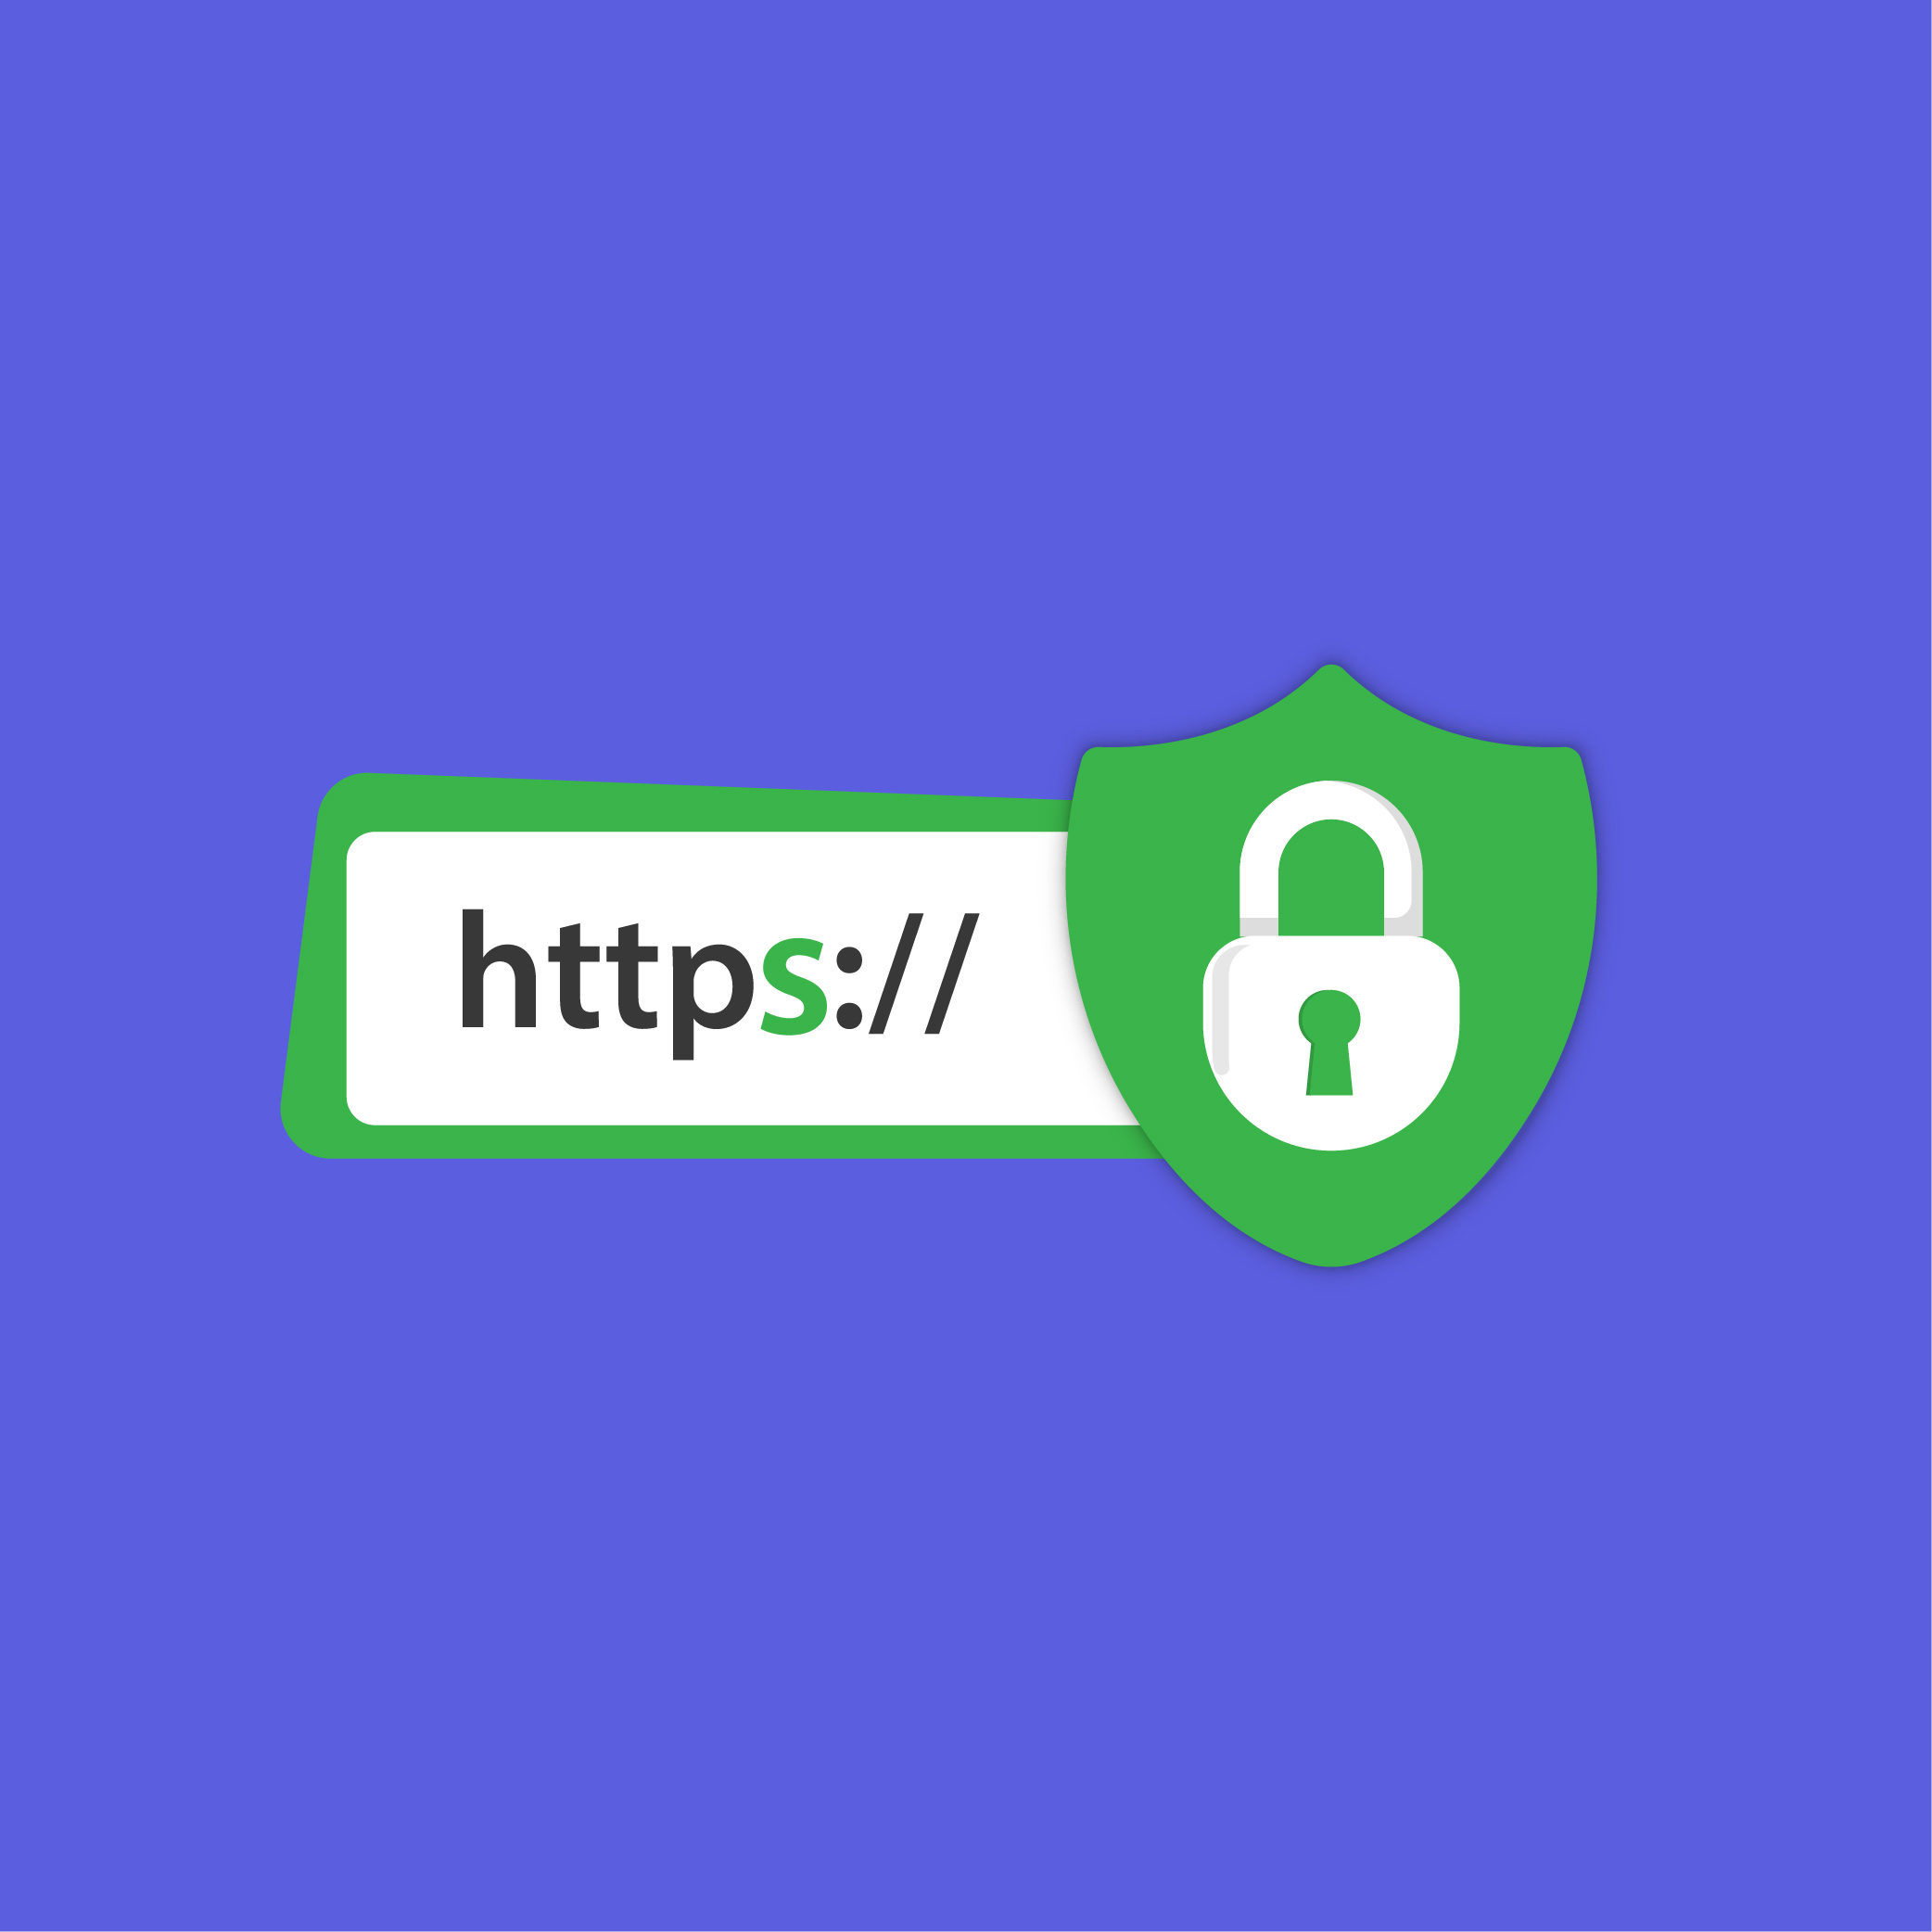 Does Your Site Need an SSL Certificate? | Adziv Digital